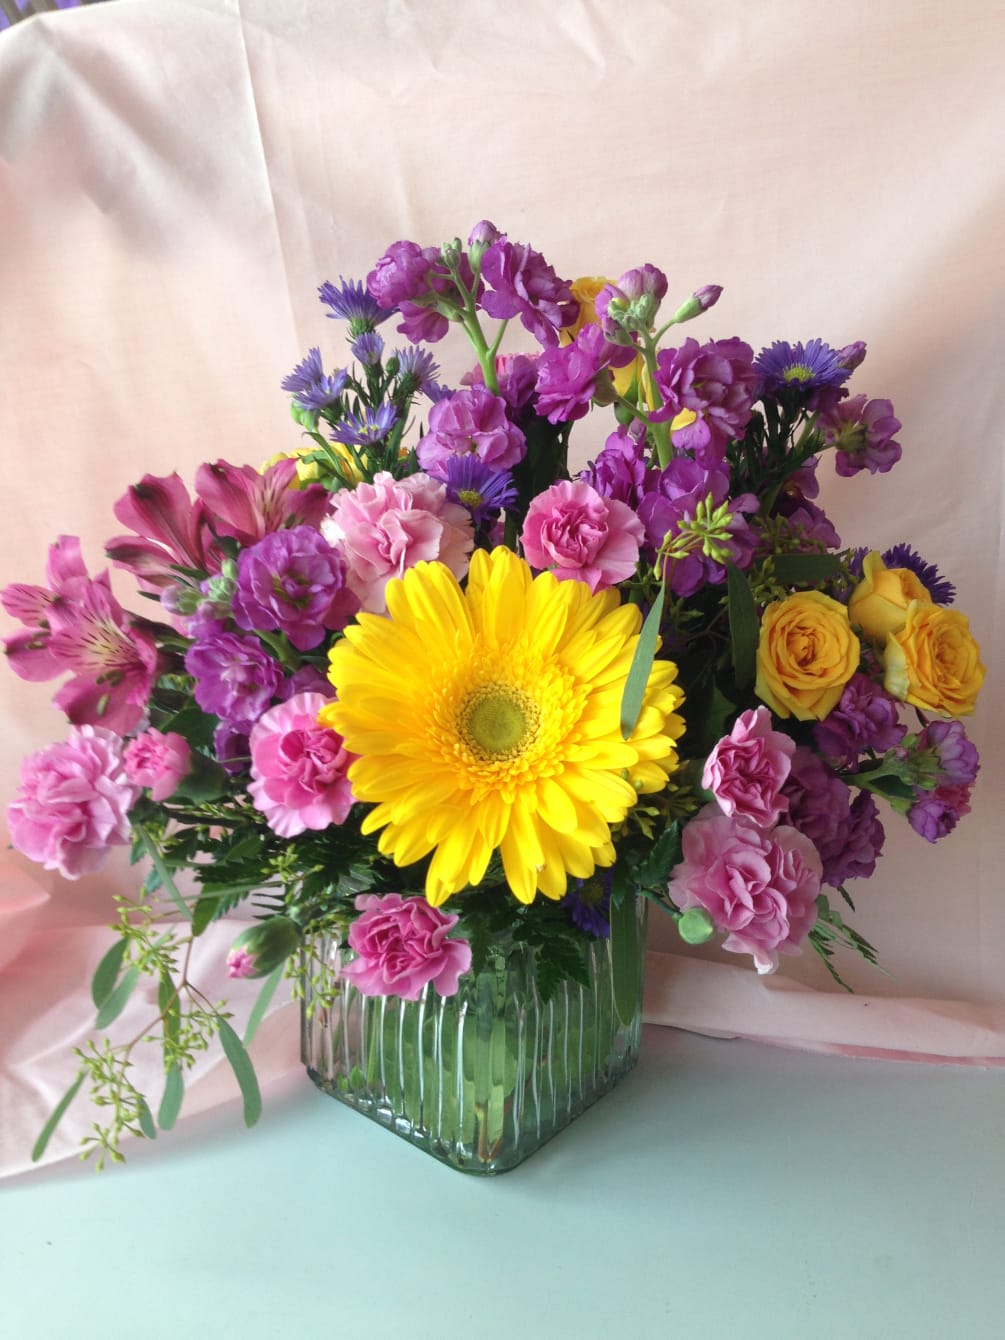 Brighten your day with this beautiful array of yellow, pinks and purple